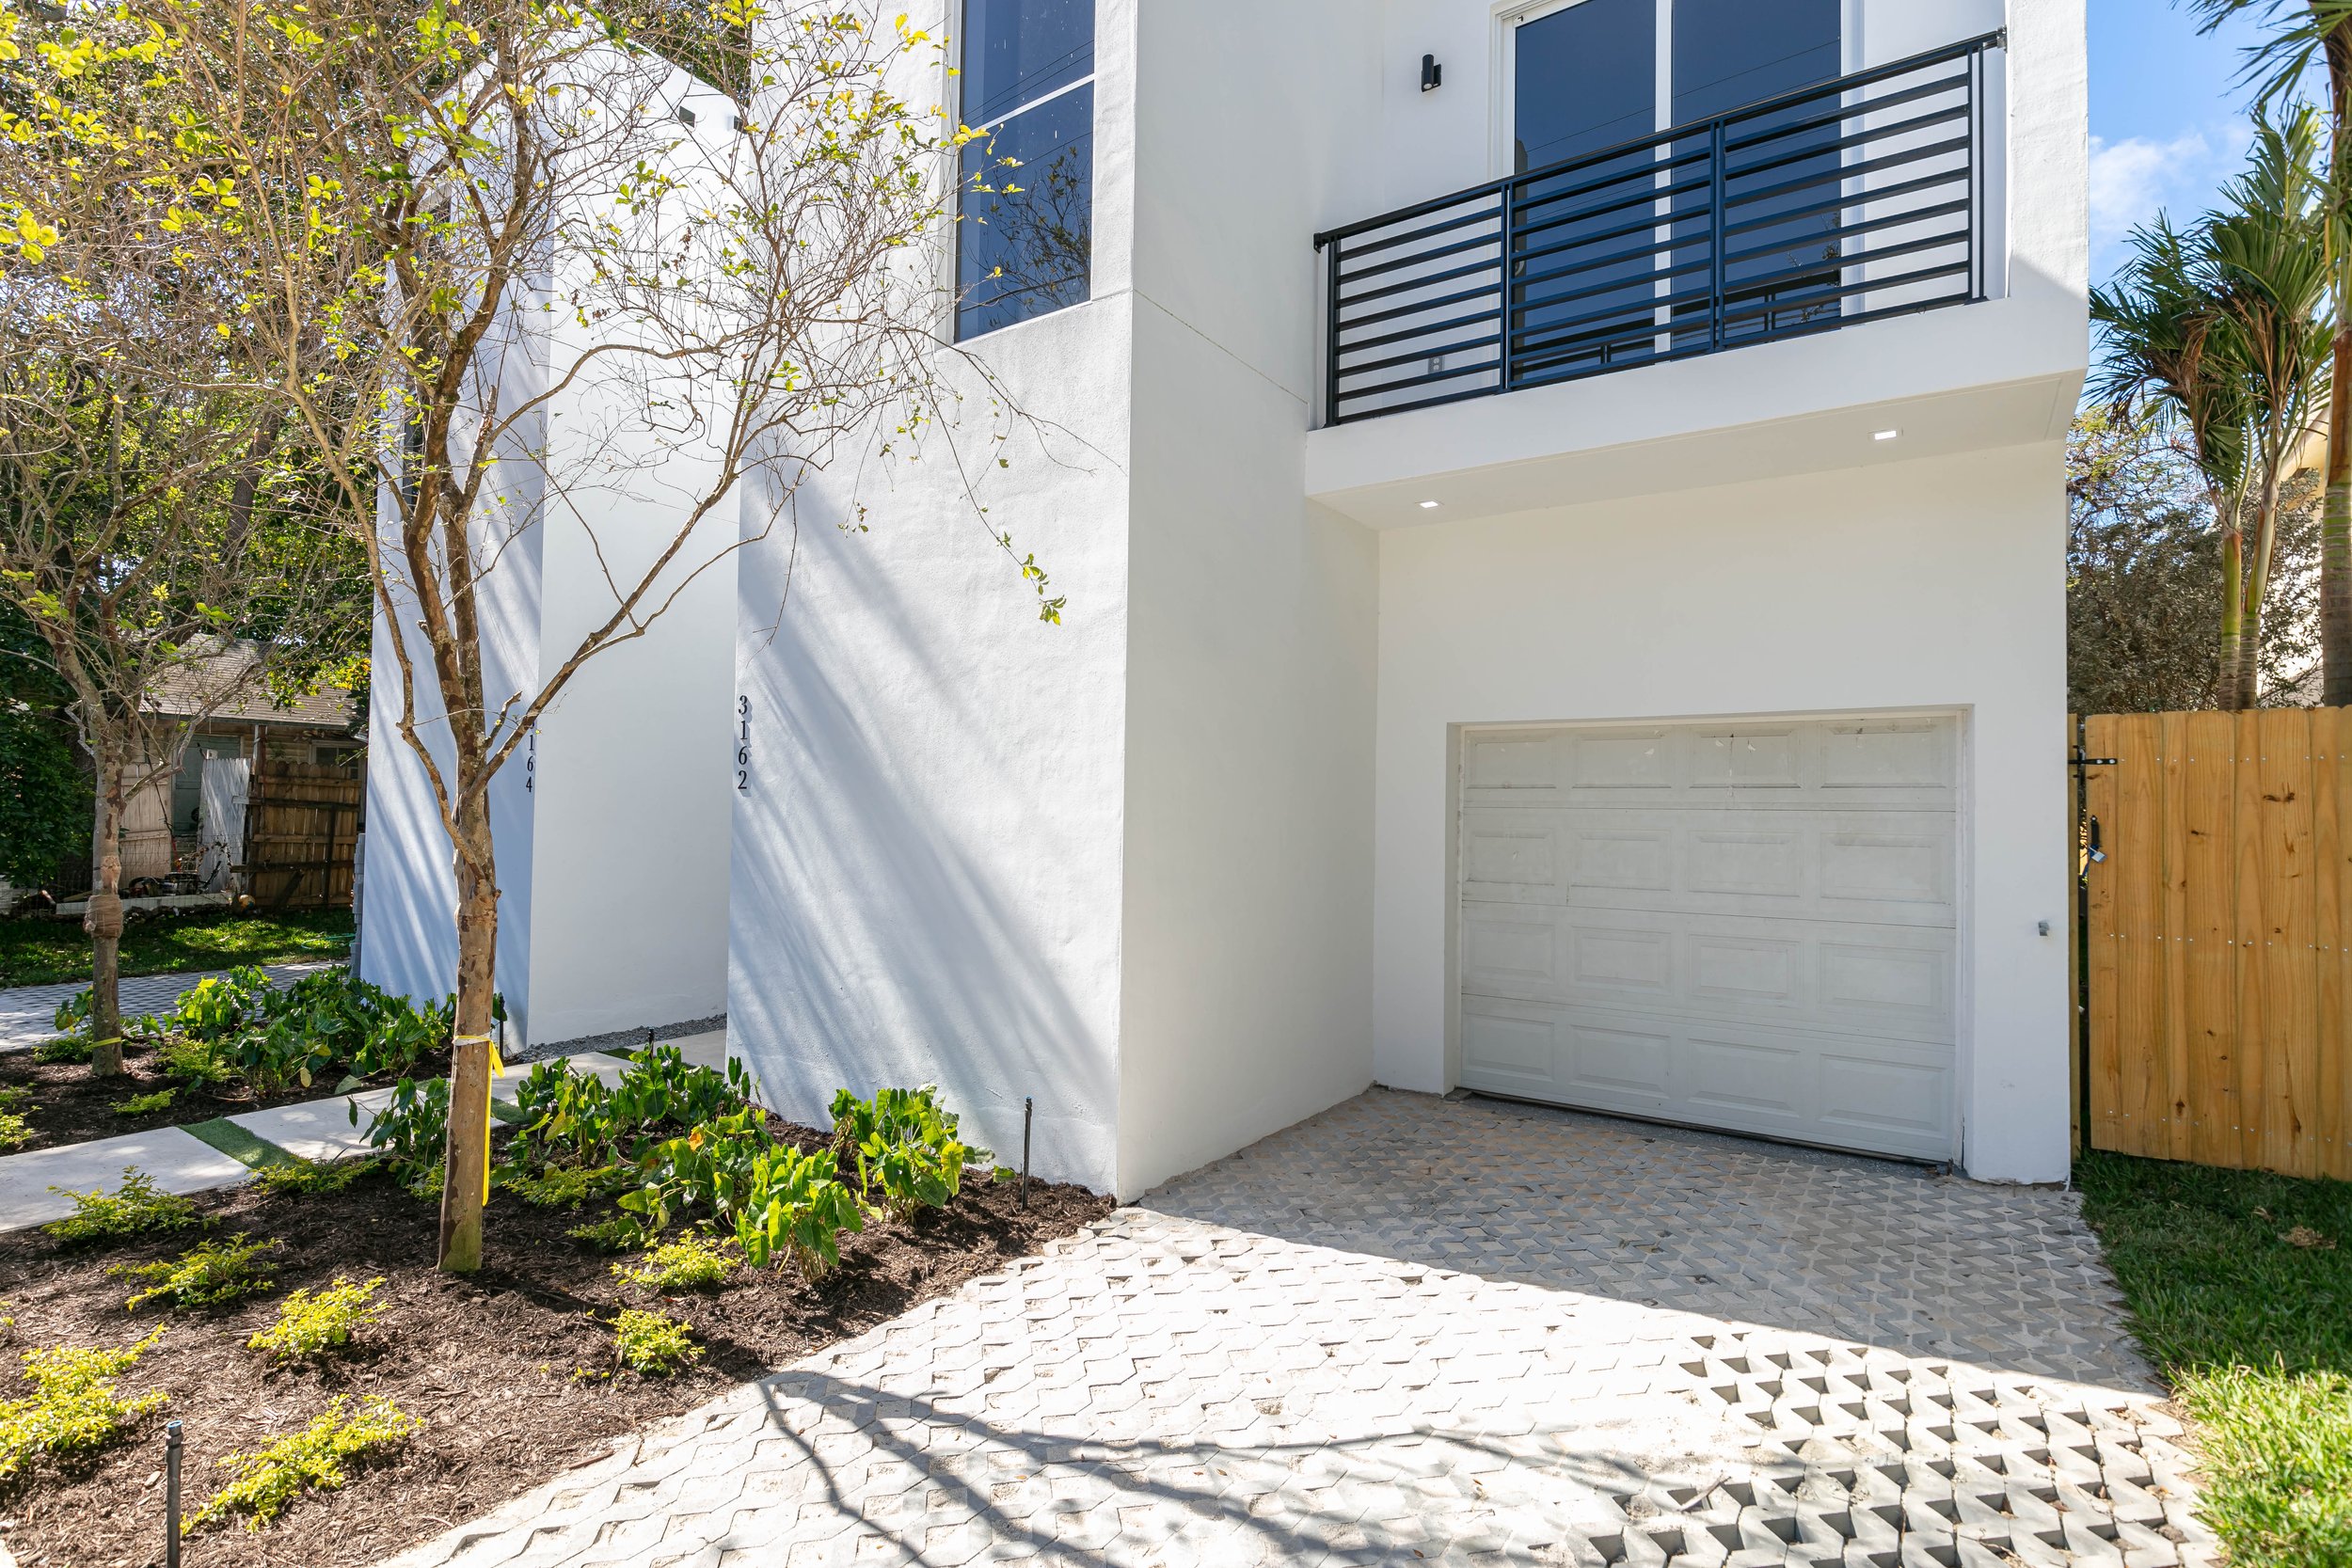 ALTARA Properties Launches Sales Of Newly Completed Casa Azzura Luxury Townhomes In Coconut Grove 49.jpg